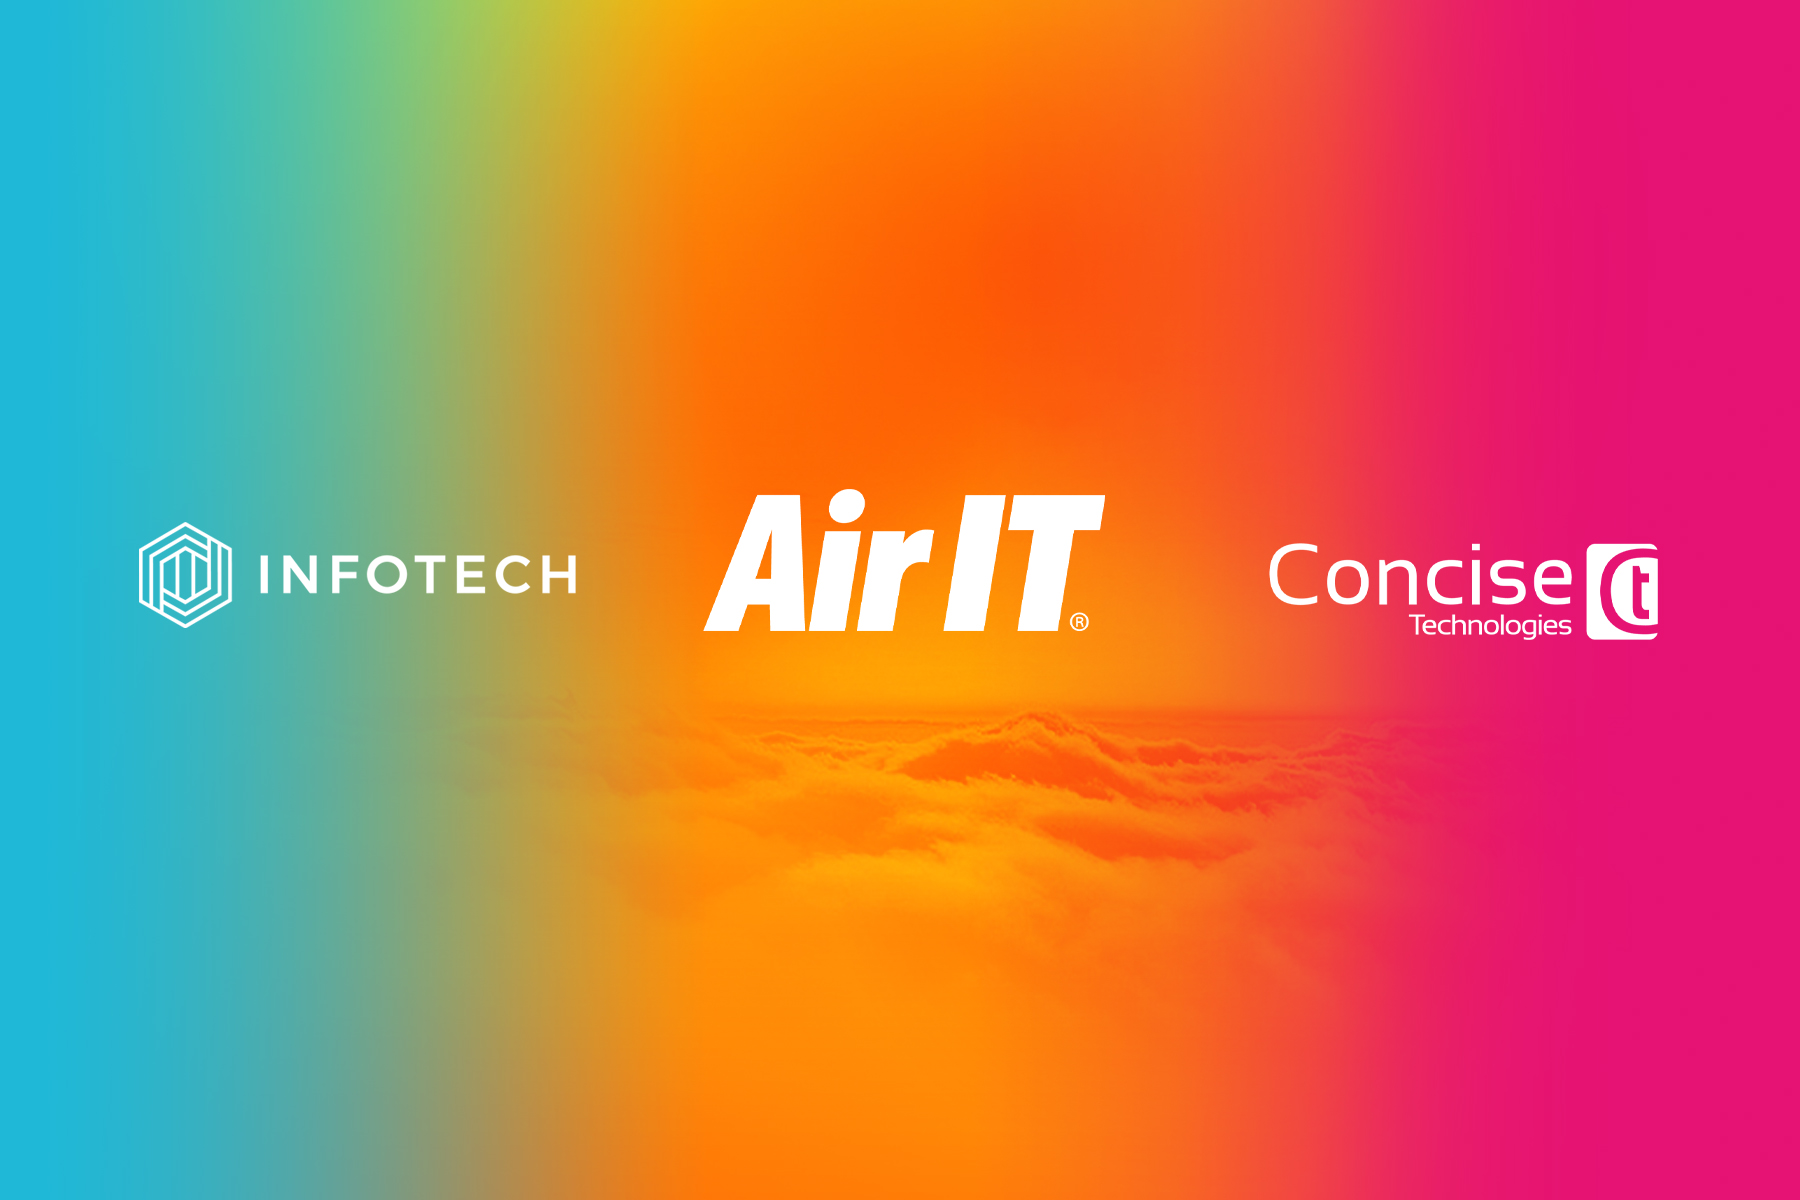 Air IT_Concise and Infotech